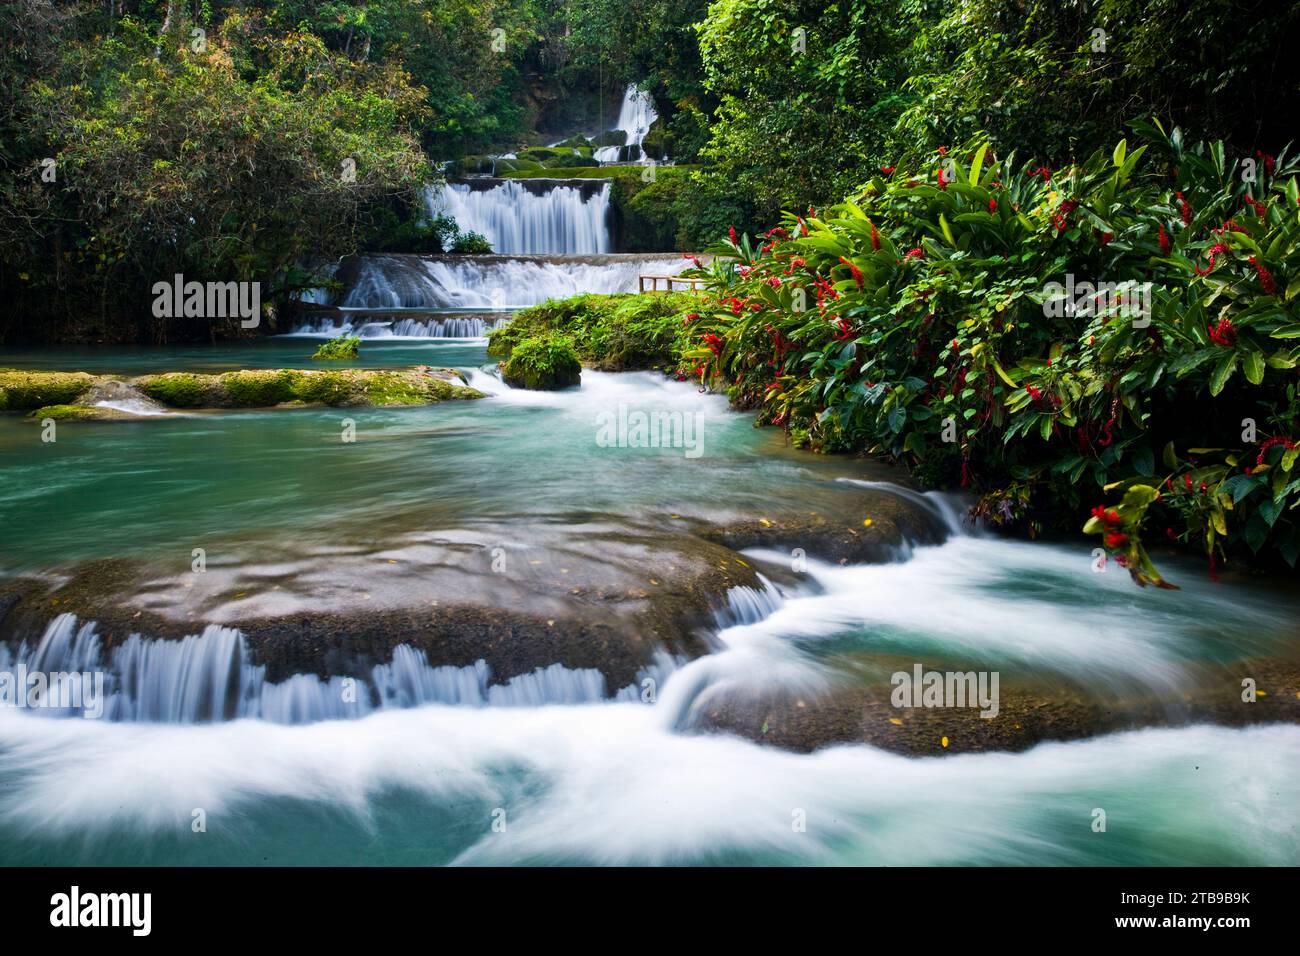 YS Falls, a 7 tiered cascading waterfall on Jamaica's south coast; Jamaica, West Indies Stock Photo